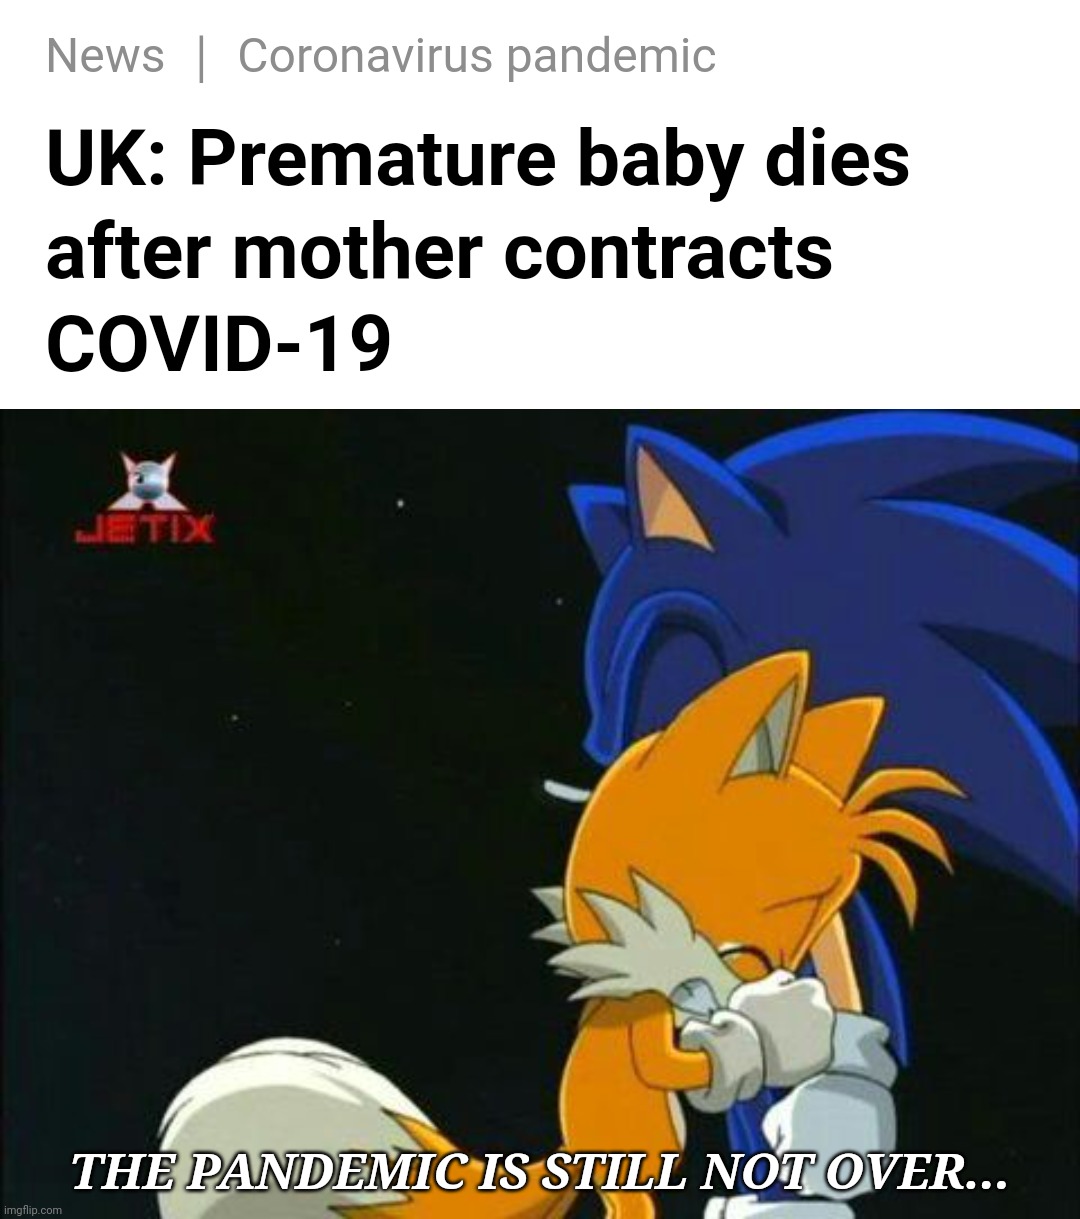 ToT | THE PANDEMIC IS STILL NOT OVER... | image tagged in coronavirus,covid-19,uk,baby,tails crying,memes | made w/ Imgflip meme maker